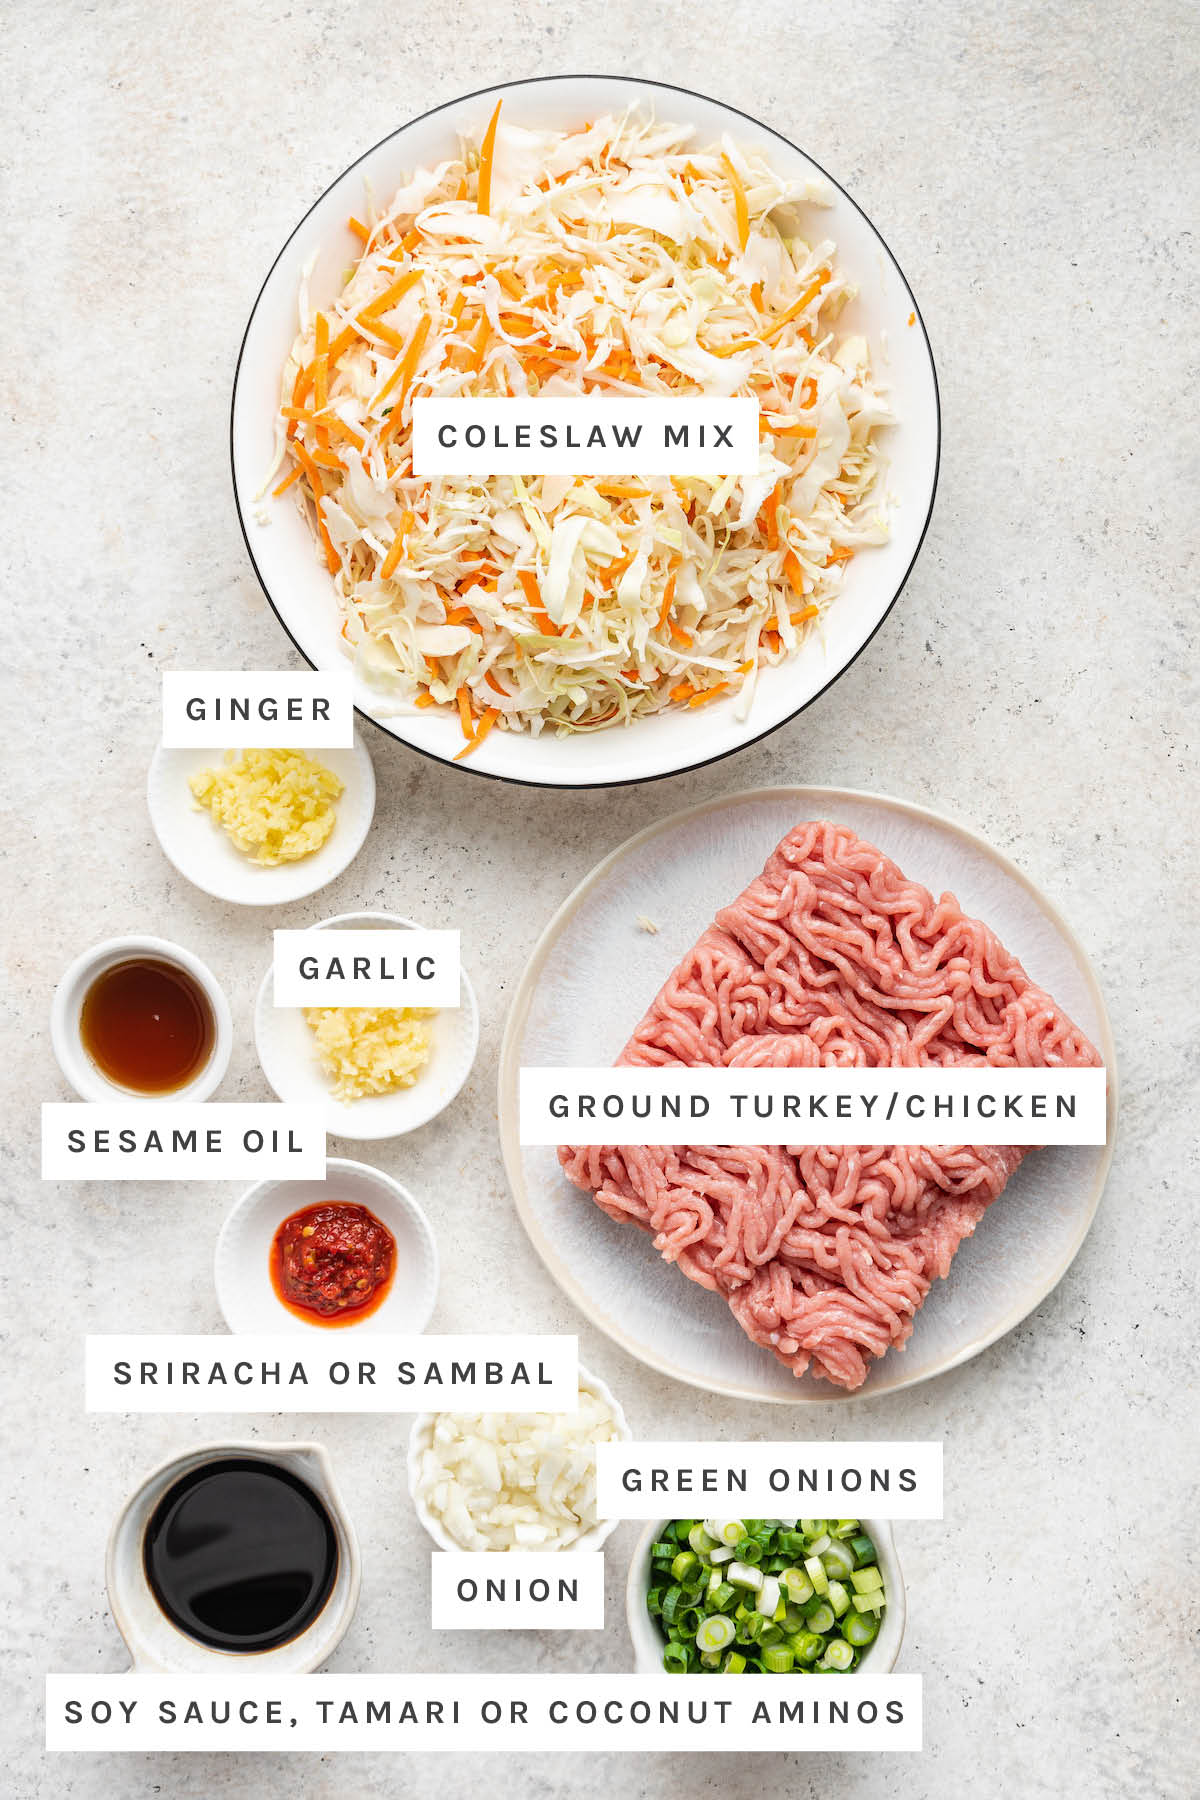 Ingredients measured out to make an Egg Roll in a Bowl: coleslaw mix, ginger, garlic, sesame oil, sambal or sriracha, ground turkey, onion, coconut aminos/tamari/soy sauce and green onions.